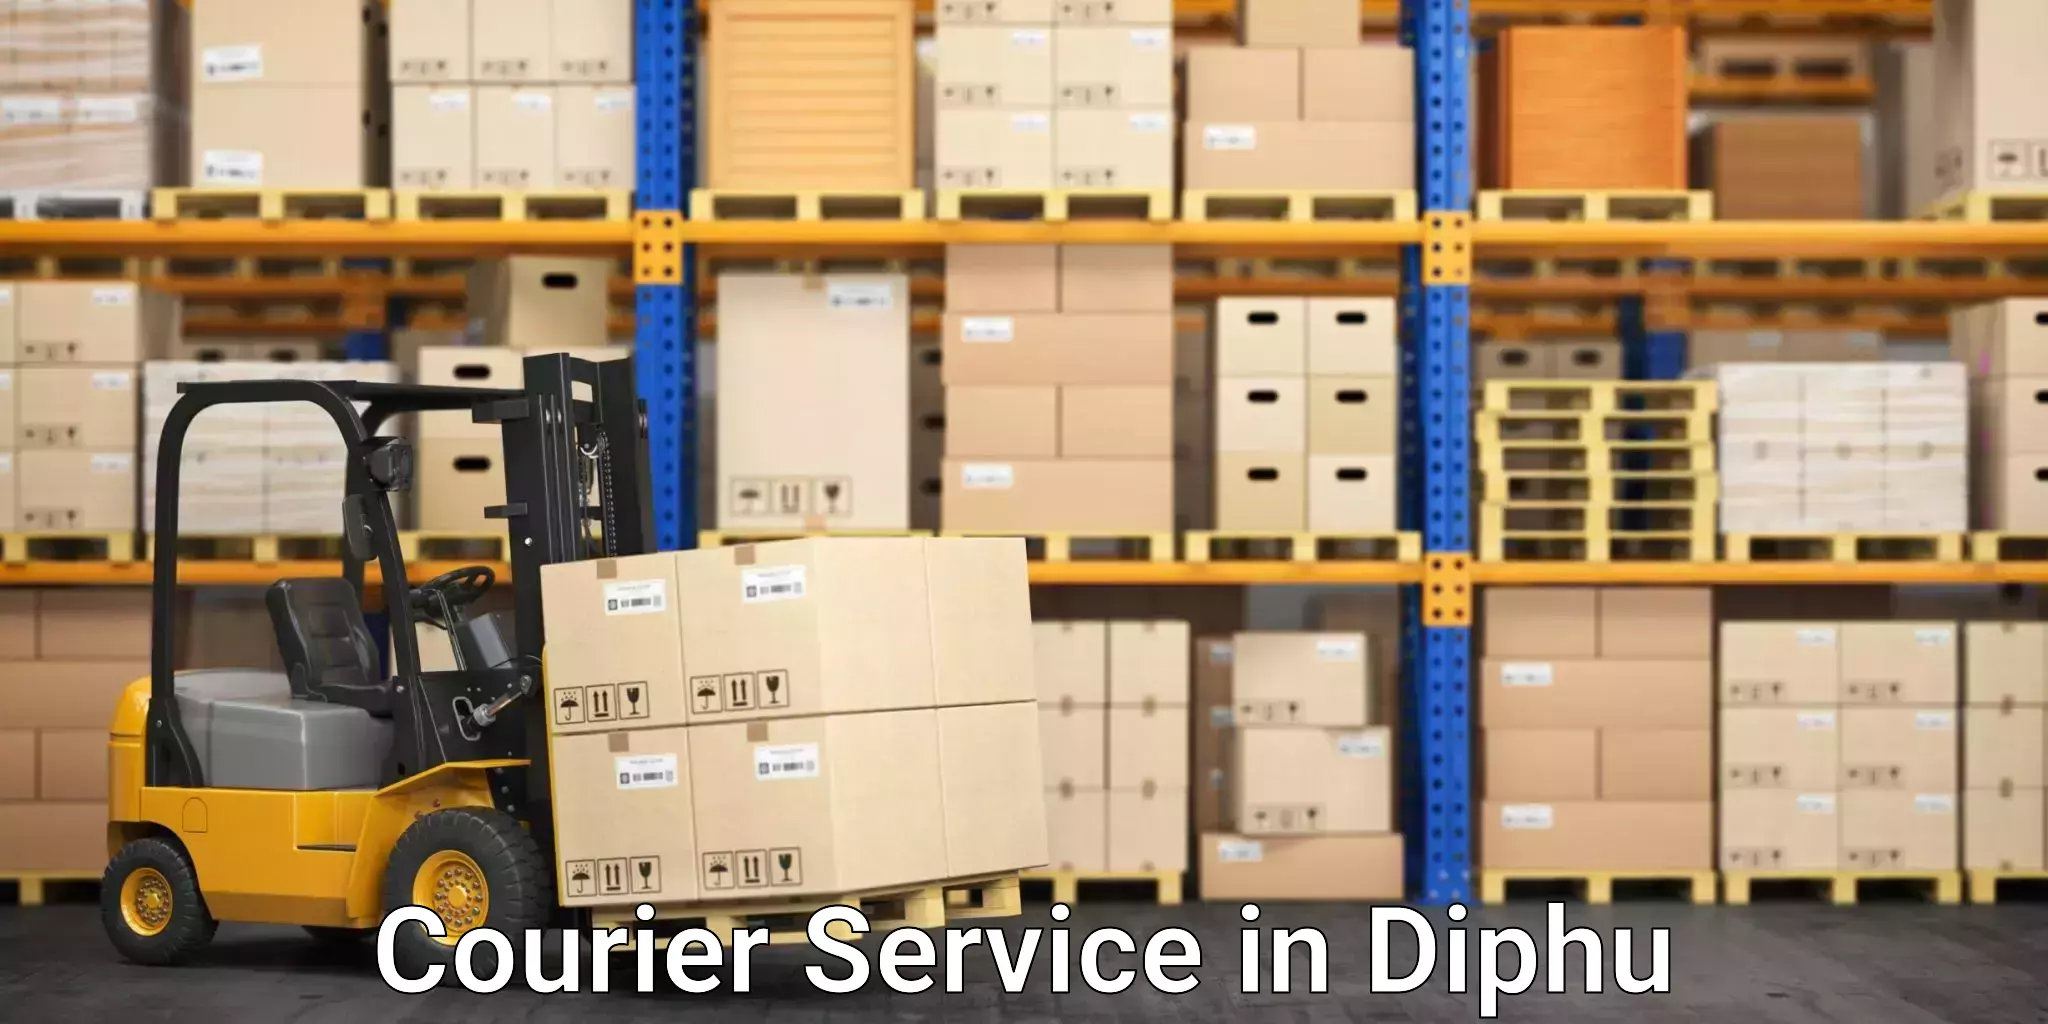 Fast shipping solutions in Diphu